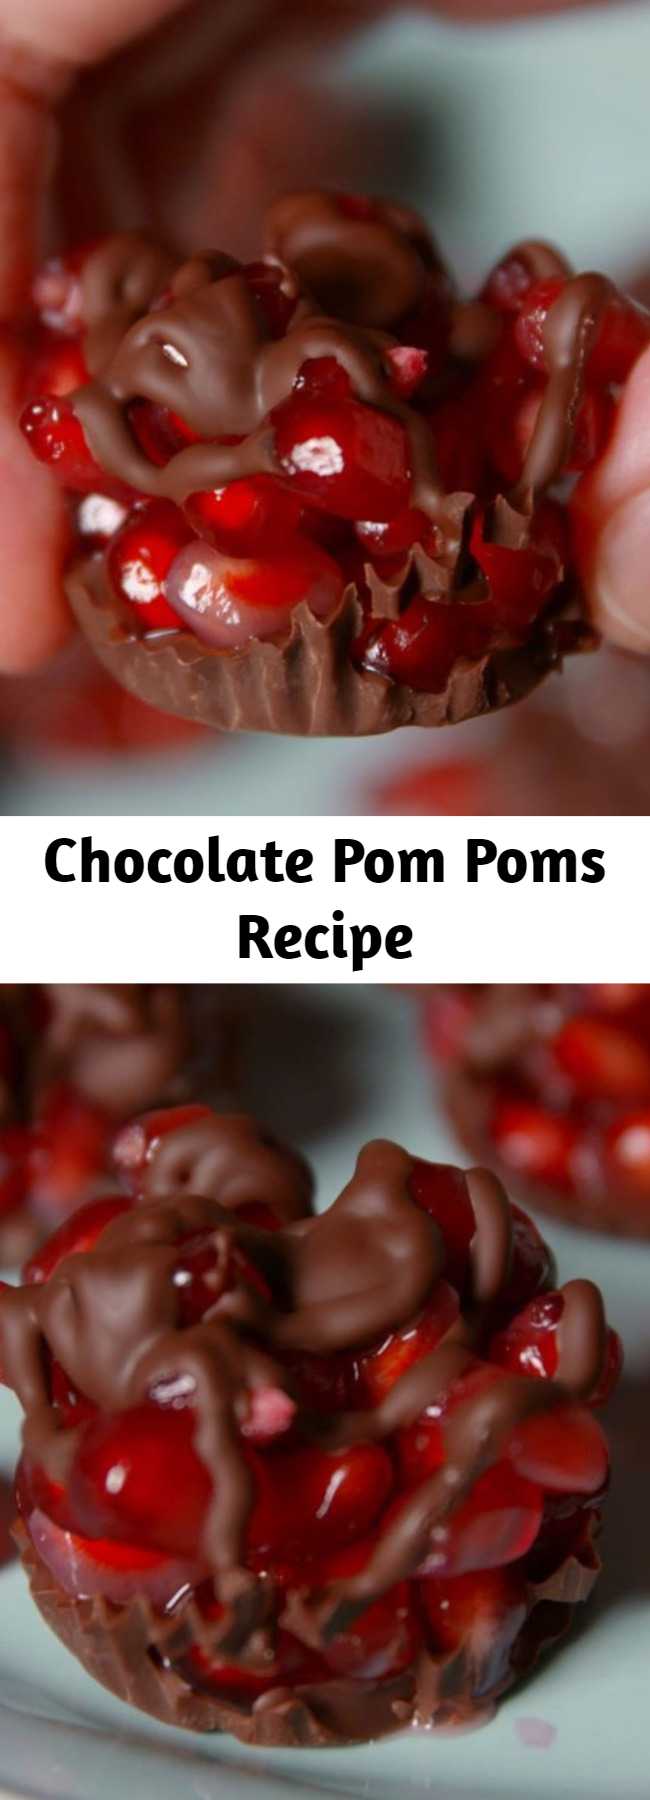 Chocolate Pom Poms Recipe - Looking for the best Chocolate Pomegranate snack? These clusters are the best. This is the healthy dessert you need right now.